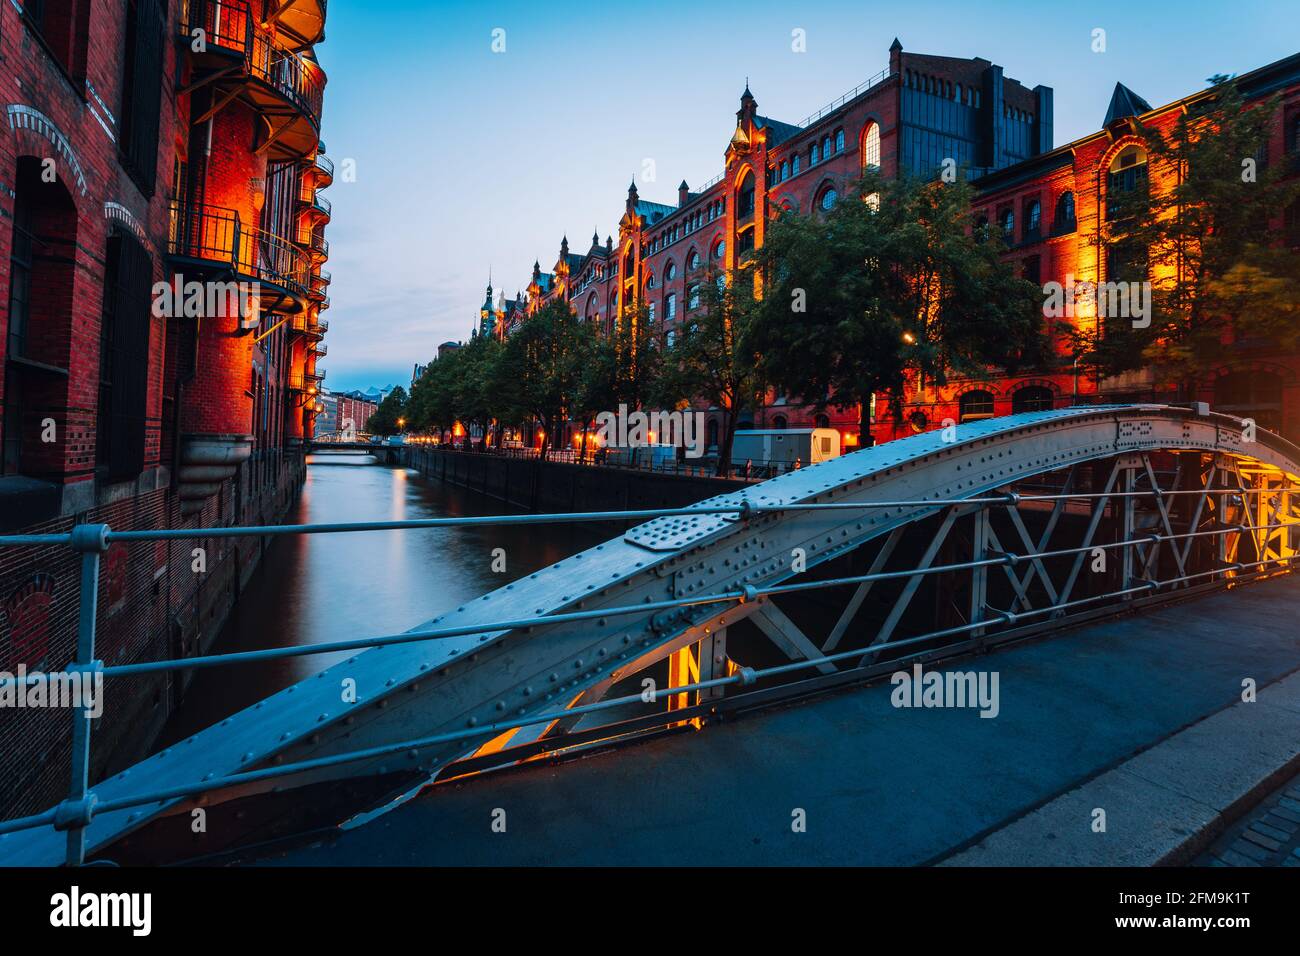 Touristic spot of old bridge and red brick illuminated buildings, canal and square in golden sunset light. Speicherstadt Hamburg. Warehause District at dawn. Stock Photo